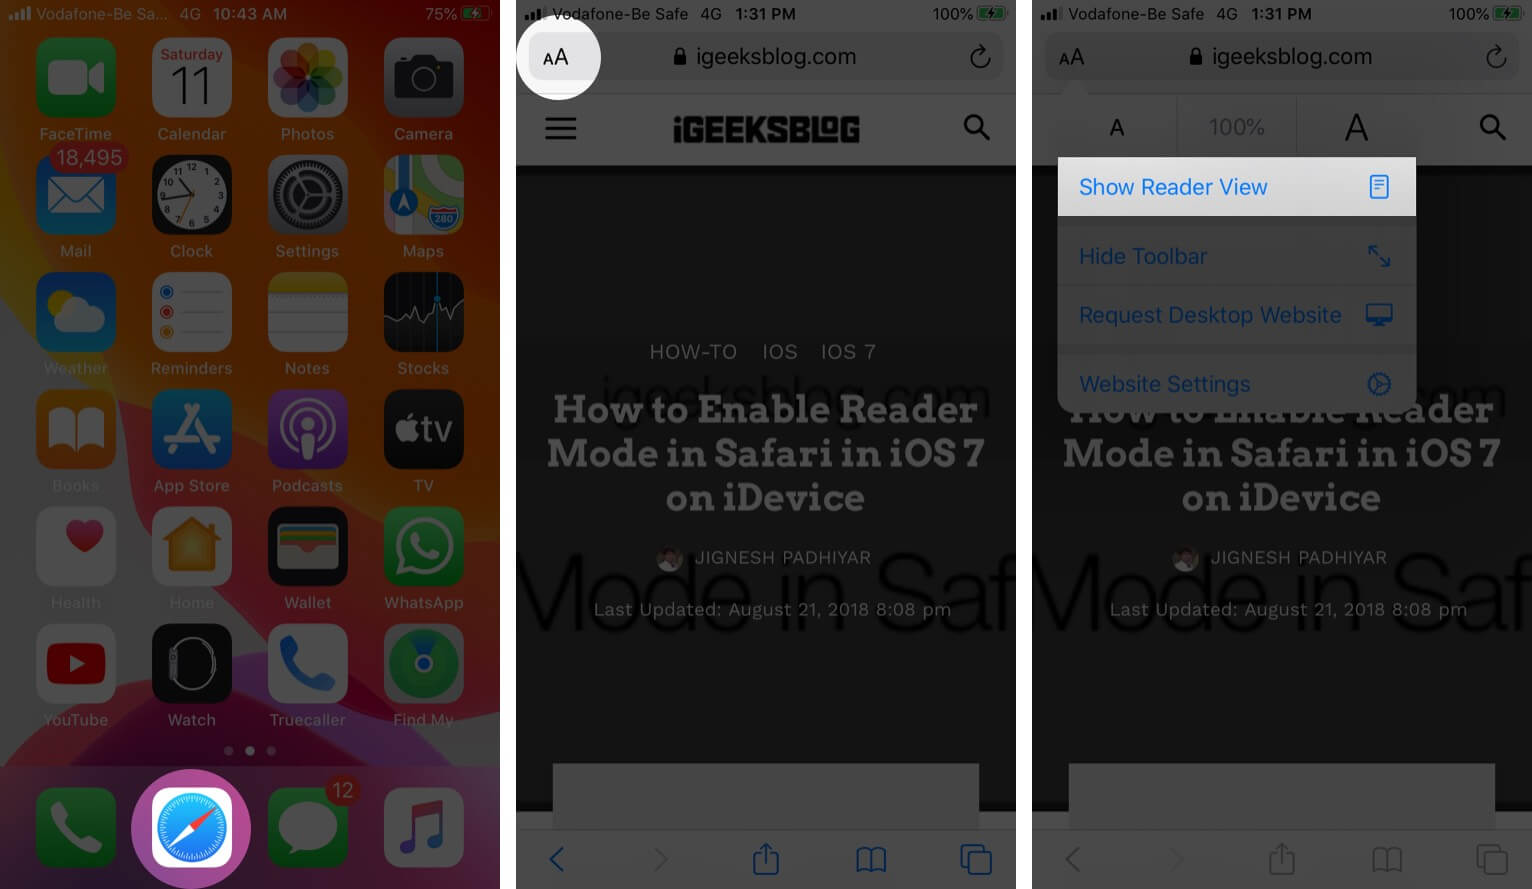 Open Safari Tap on AA and Then Tap on Show Reader View